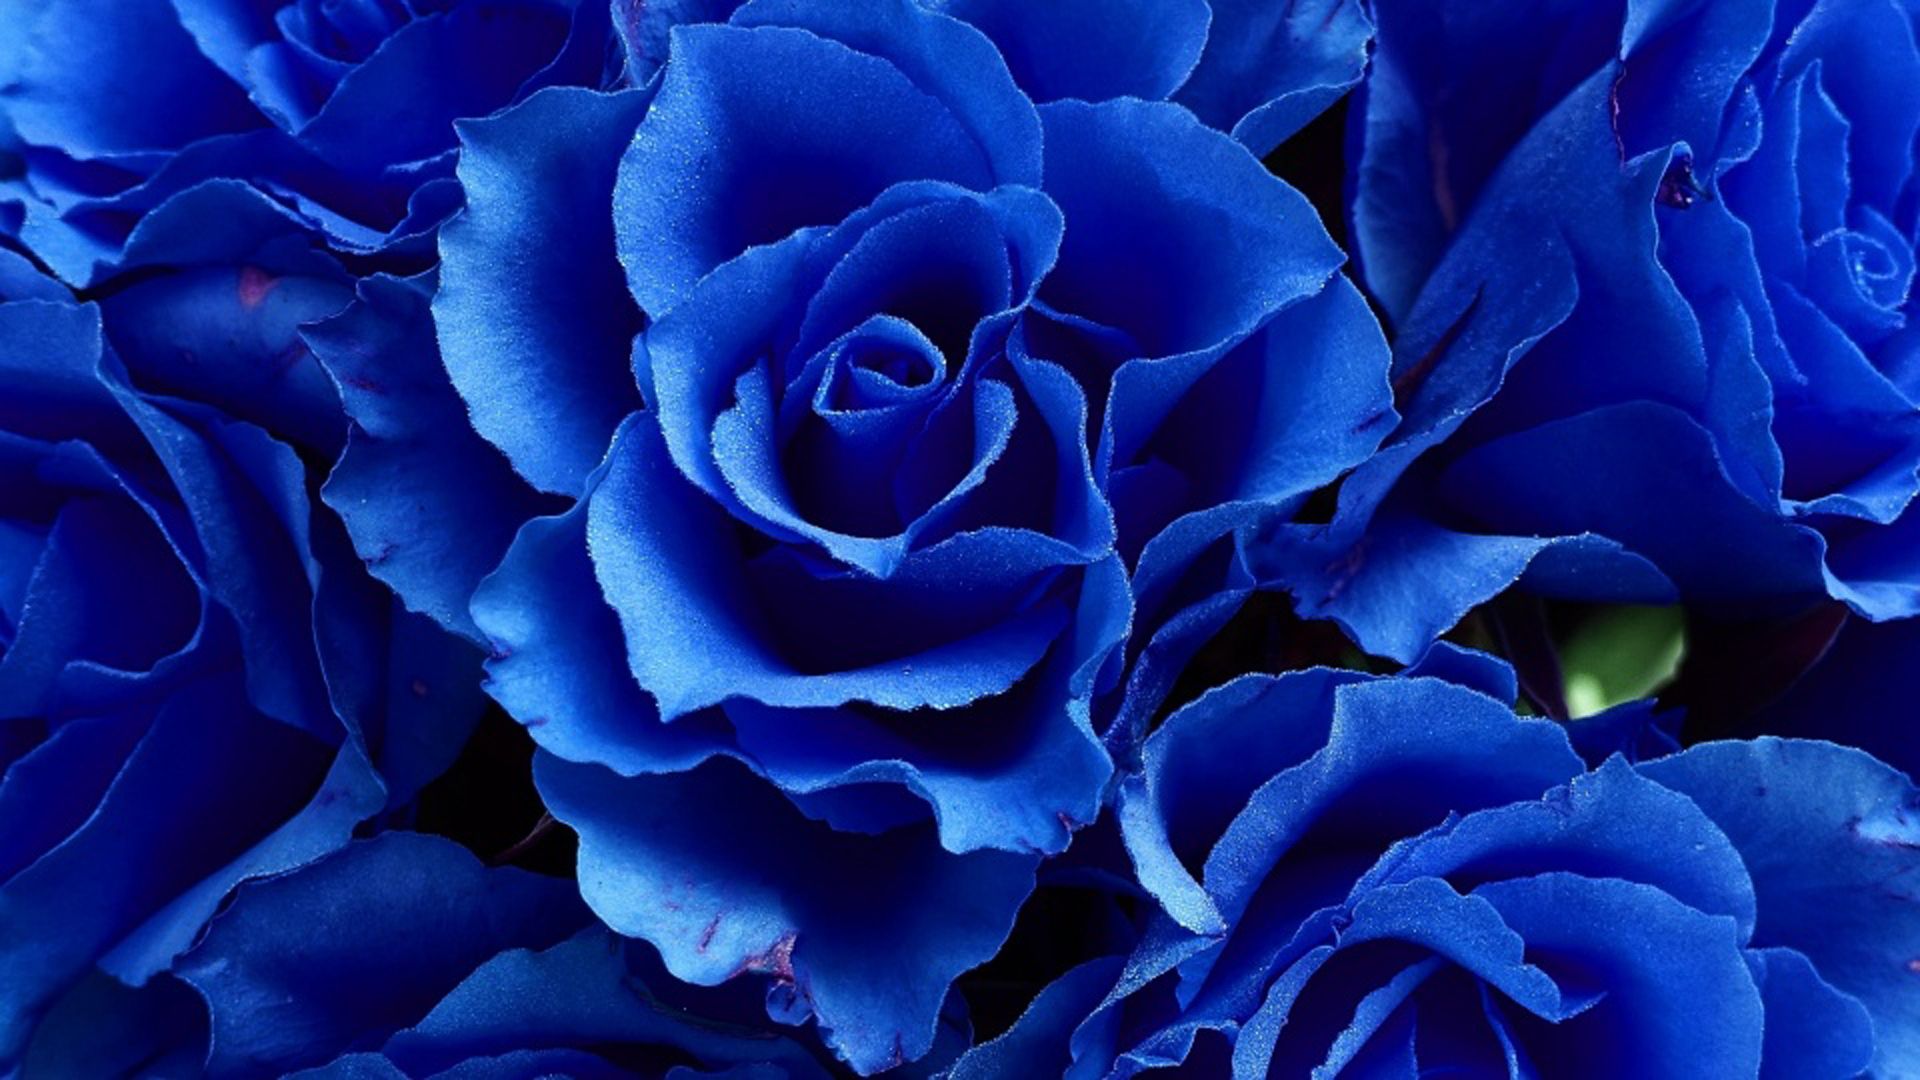 A close up of blue roses - Roses